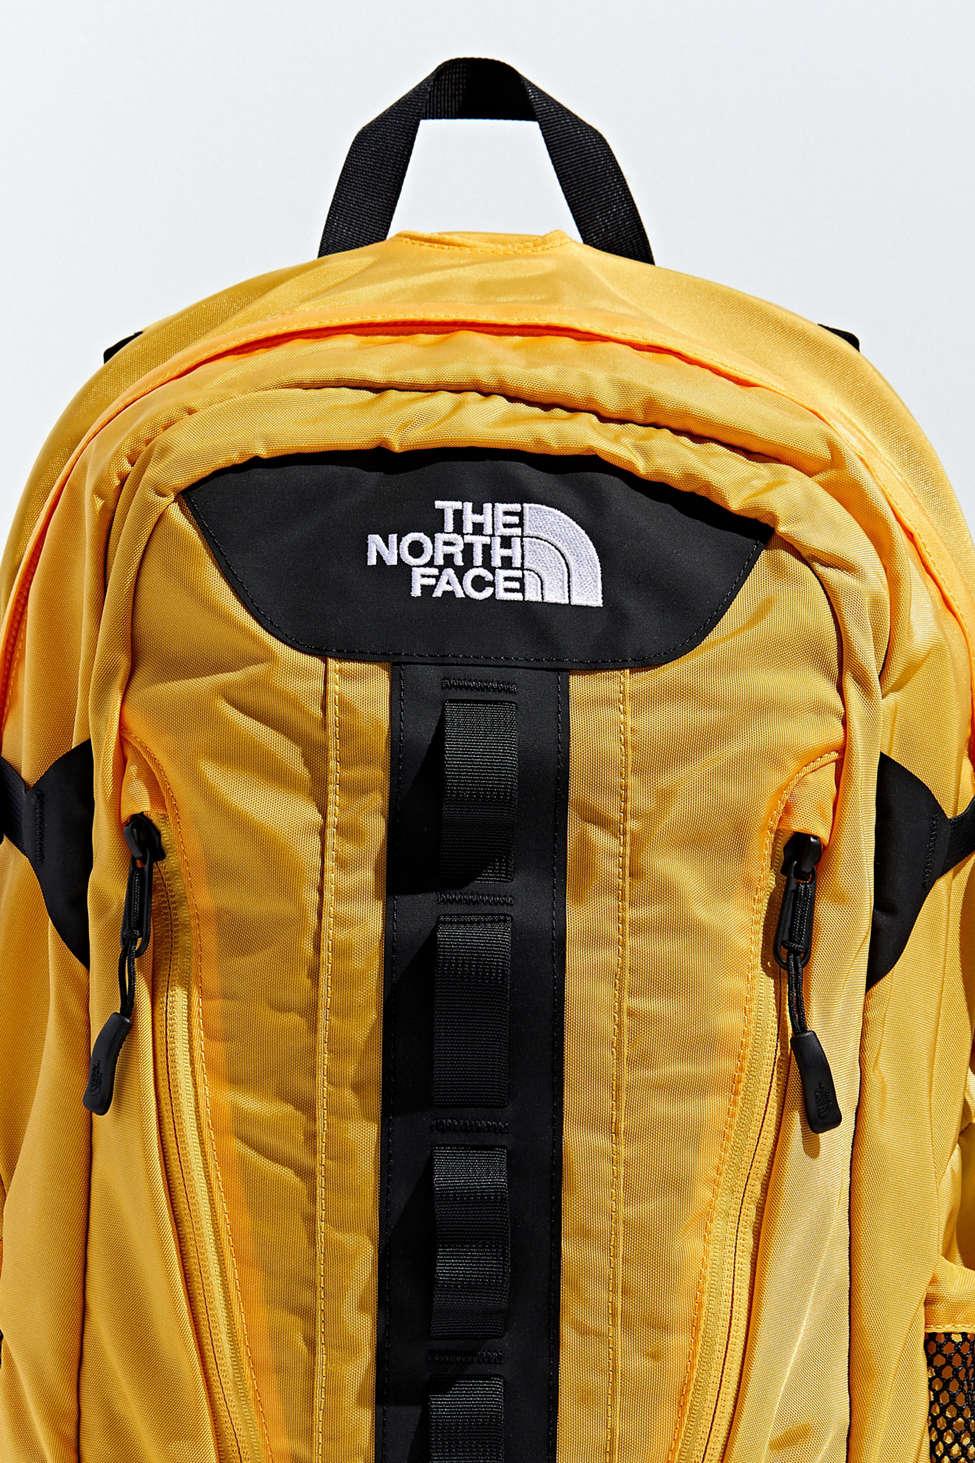 The North Face The North Face Big Shot Ii Backpack for Men - Lyst